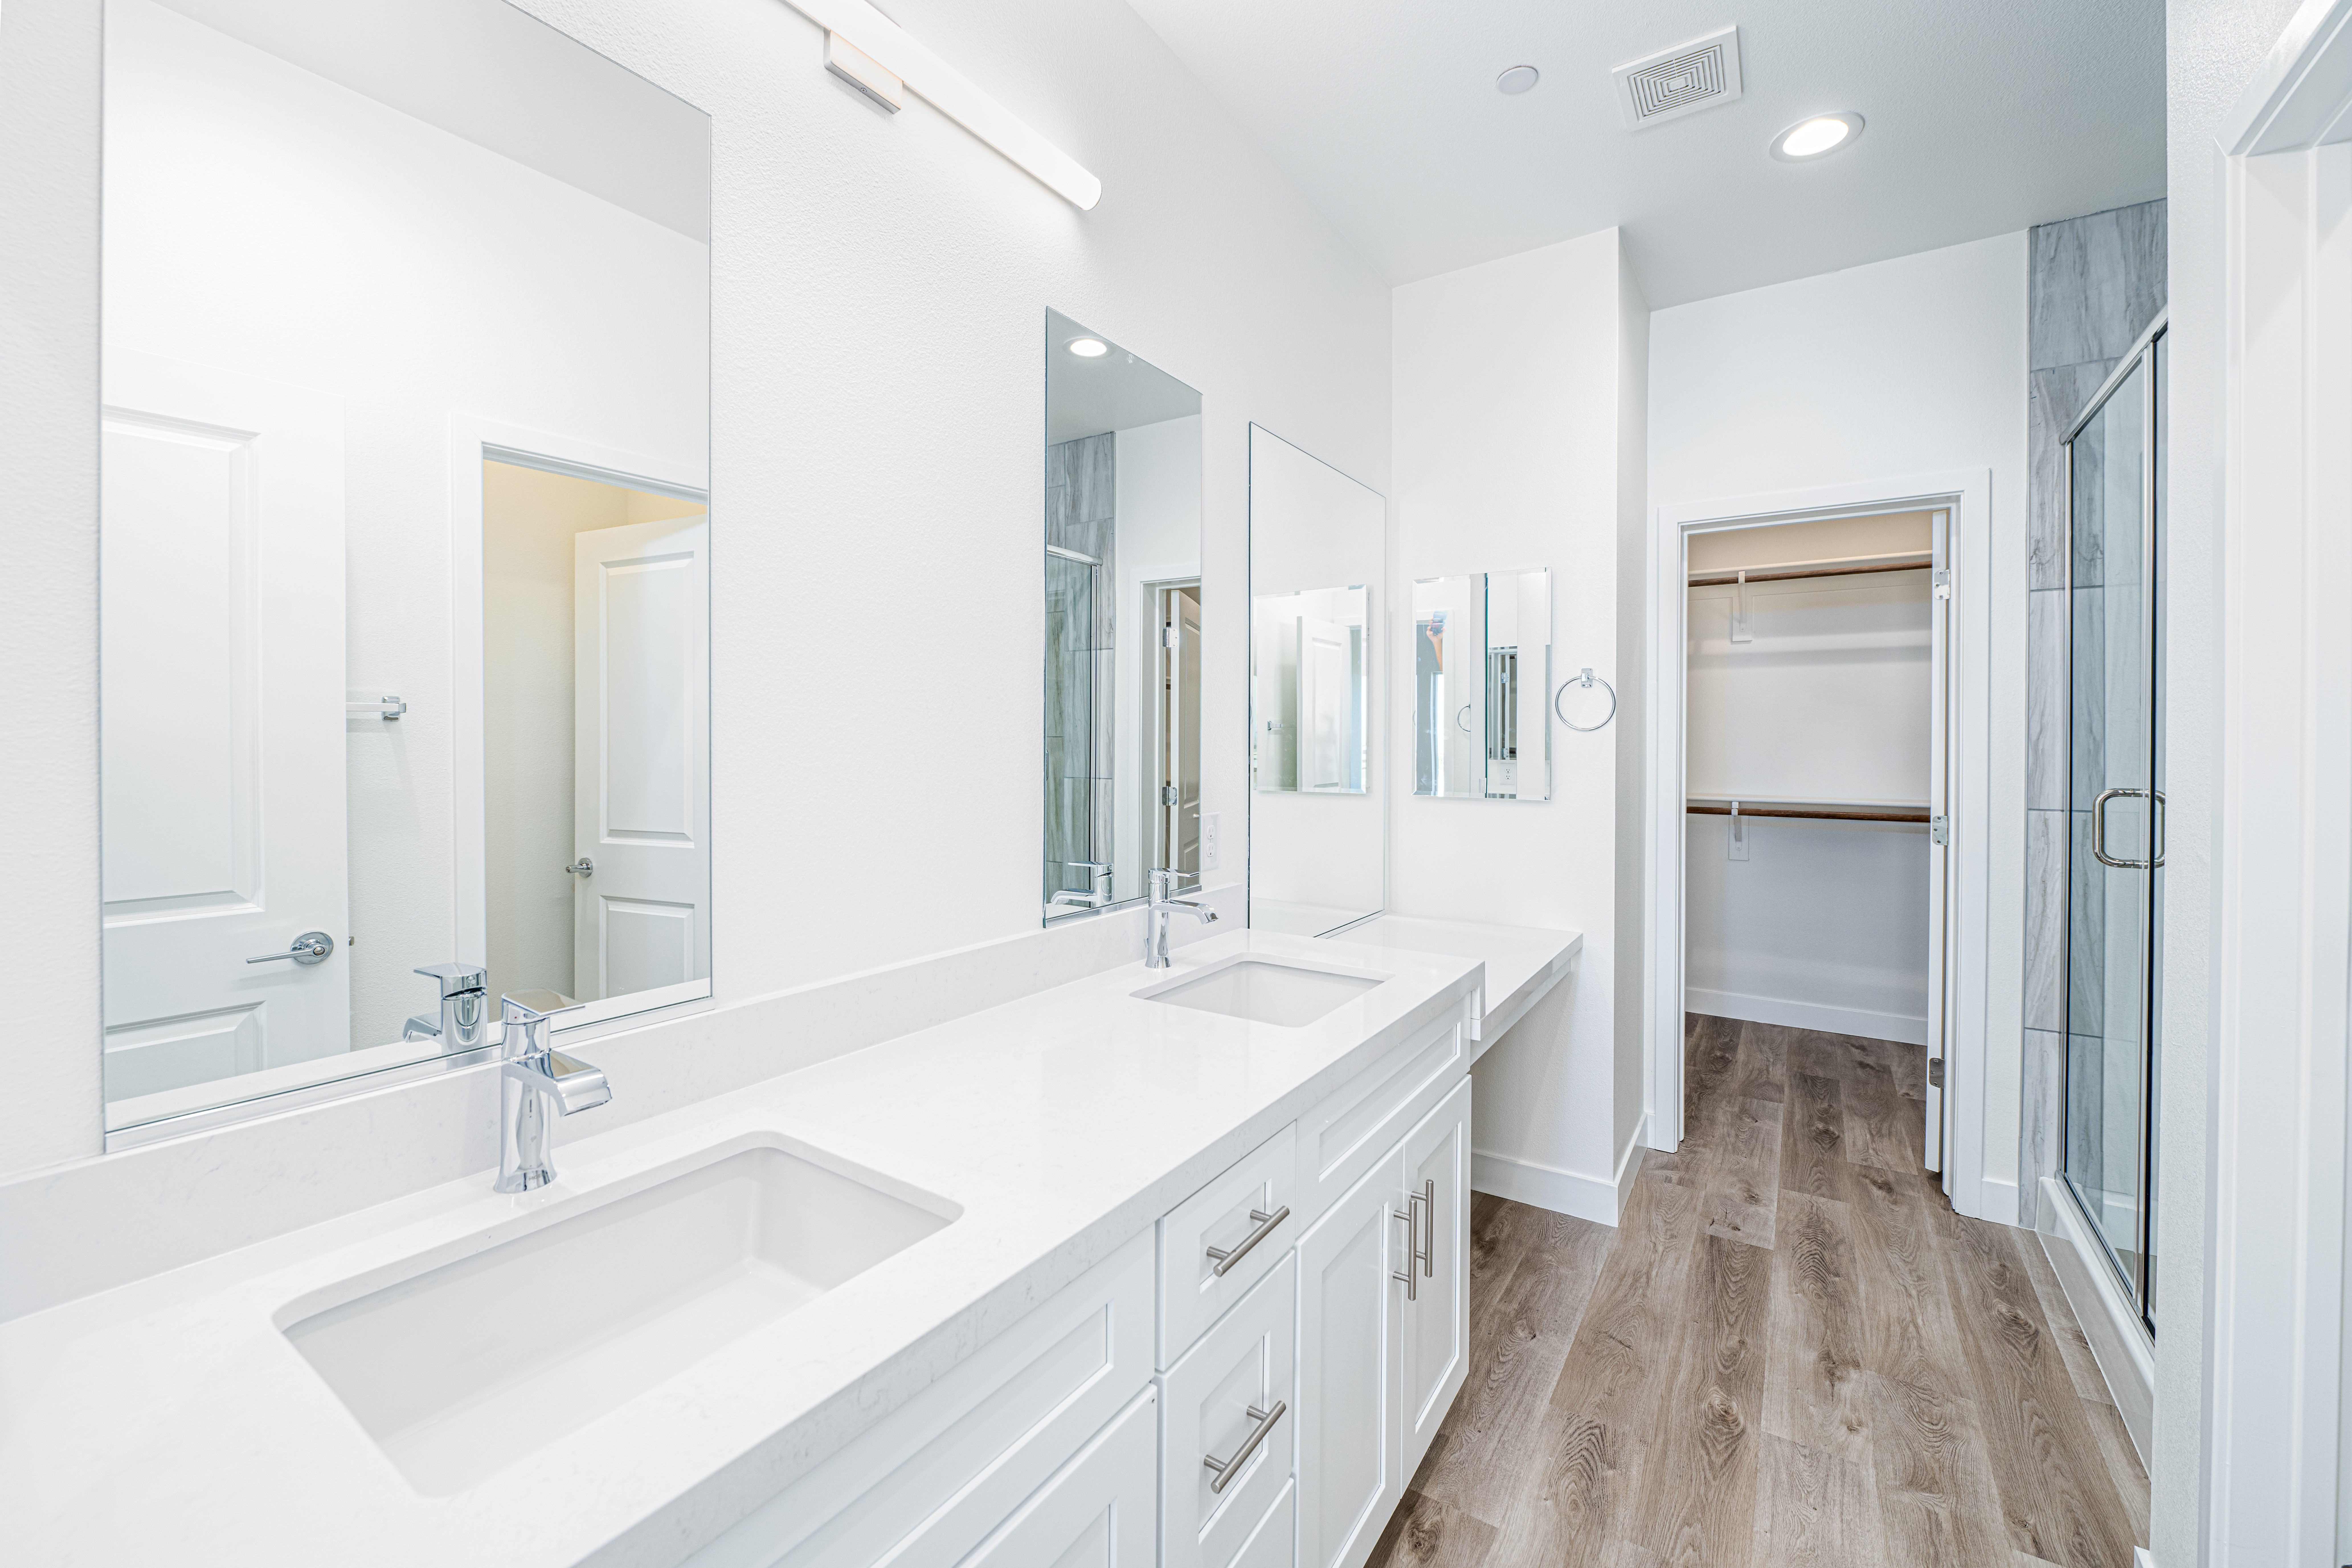 Primary Bathroom of Unit B at Thrive by Edward Homes